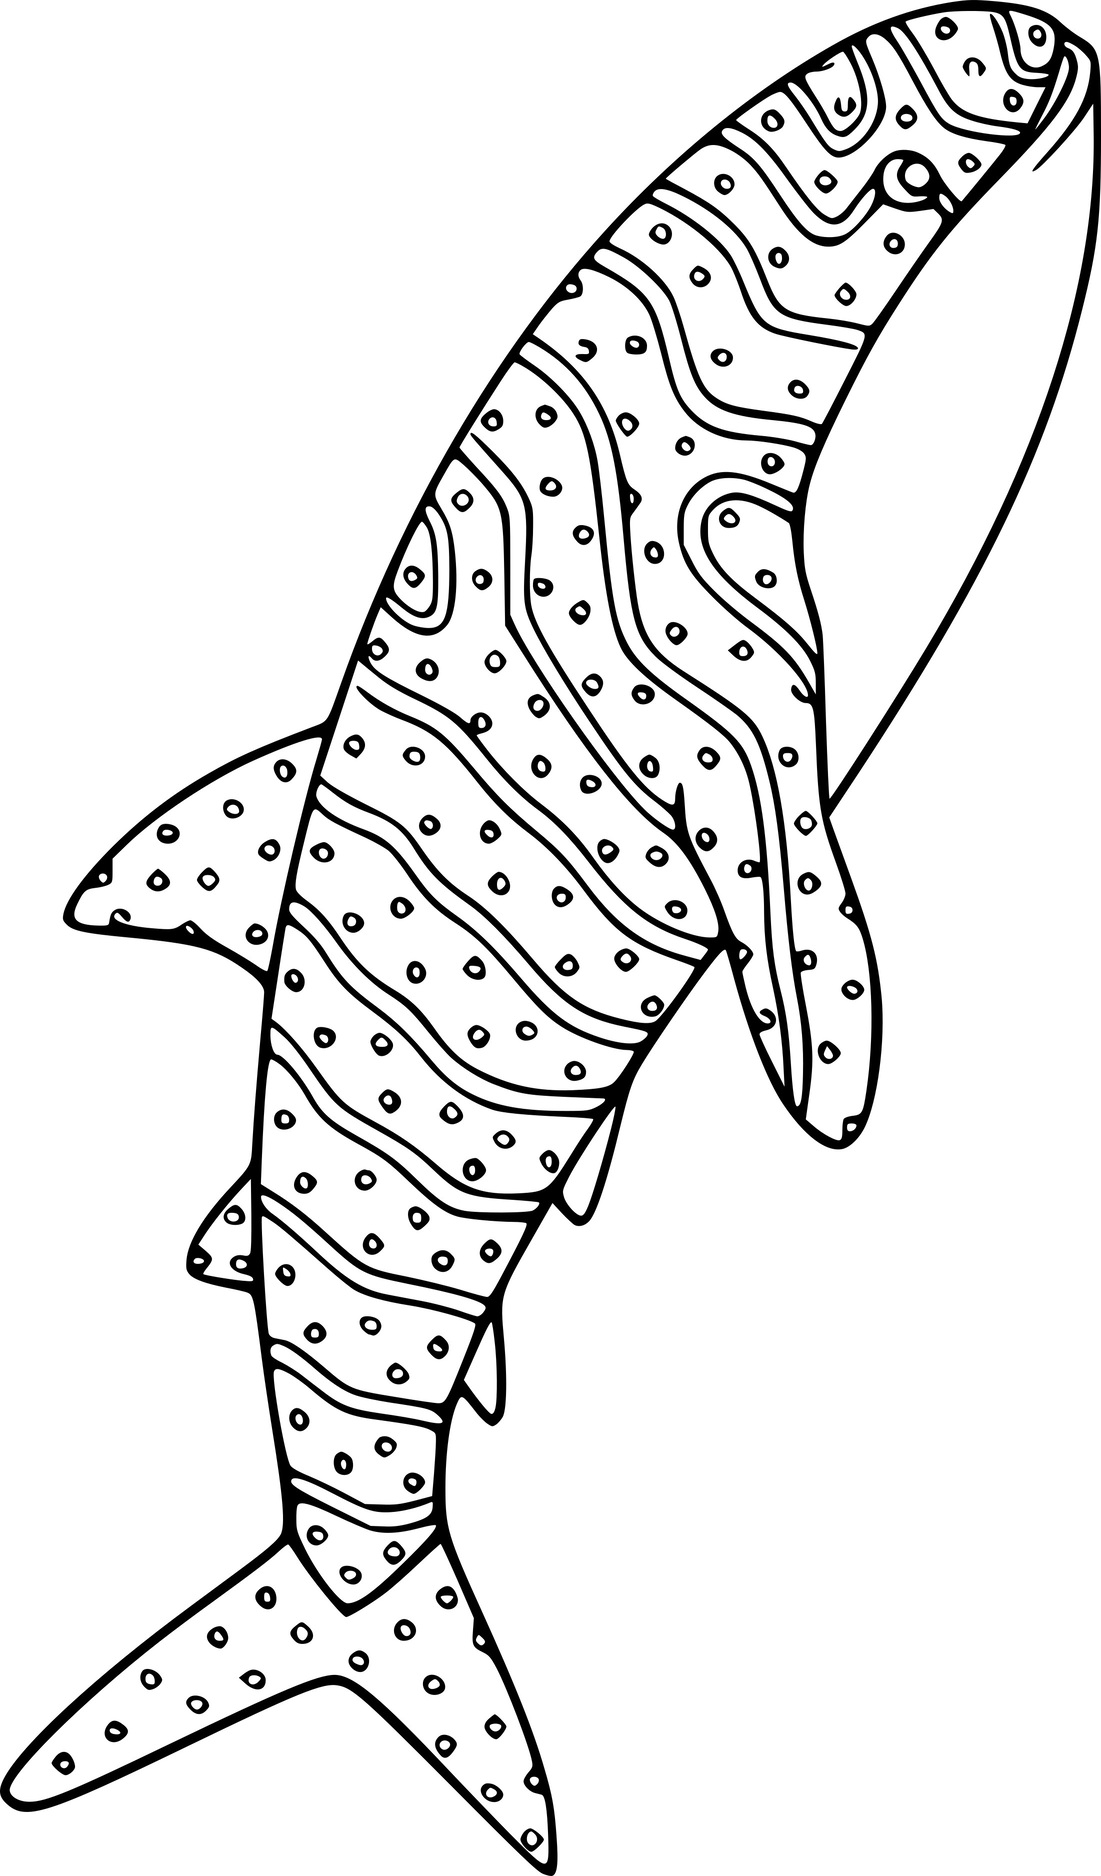 Whale Shark Jumping Out Of Water Coloring Page